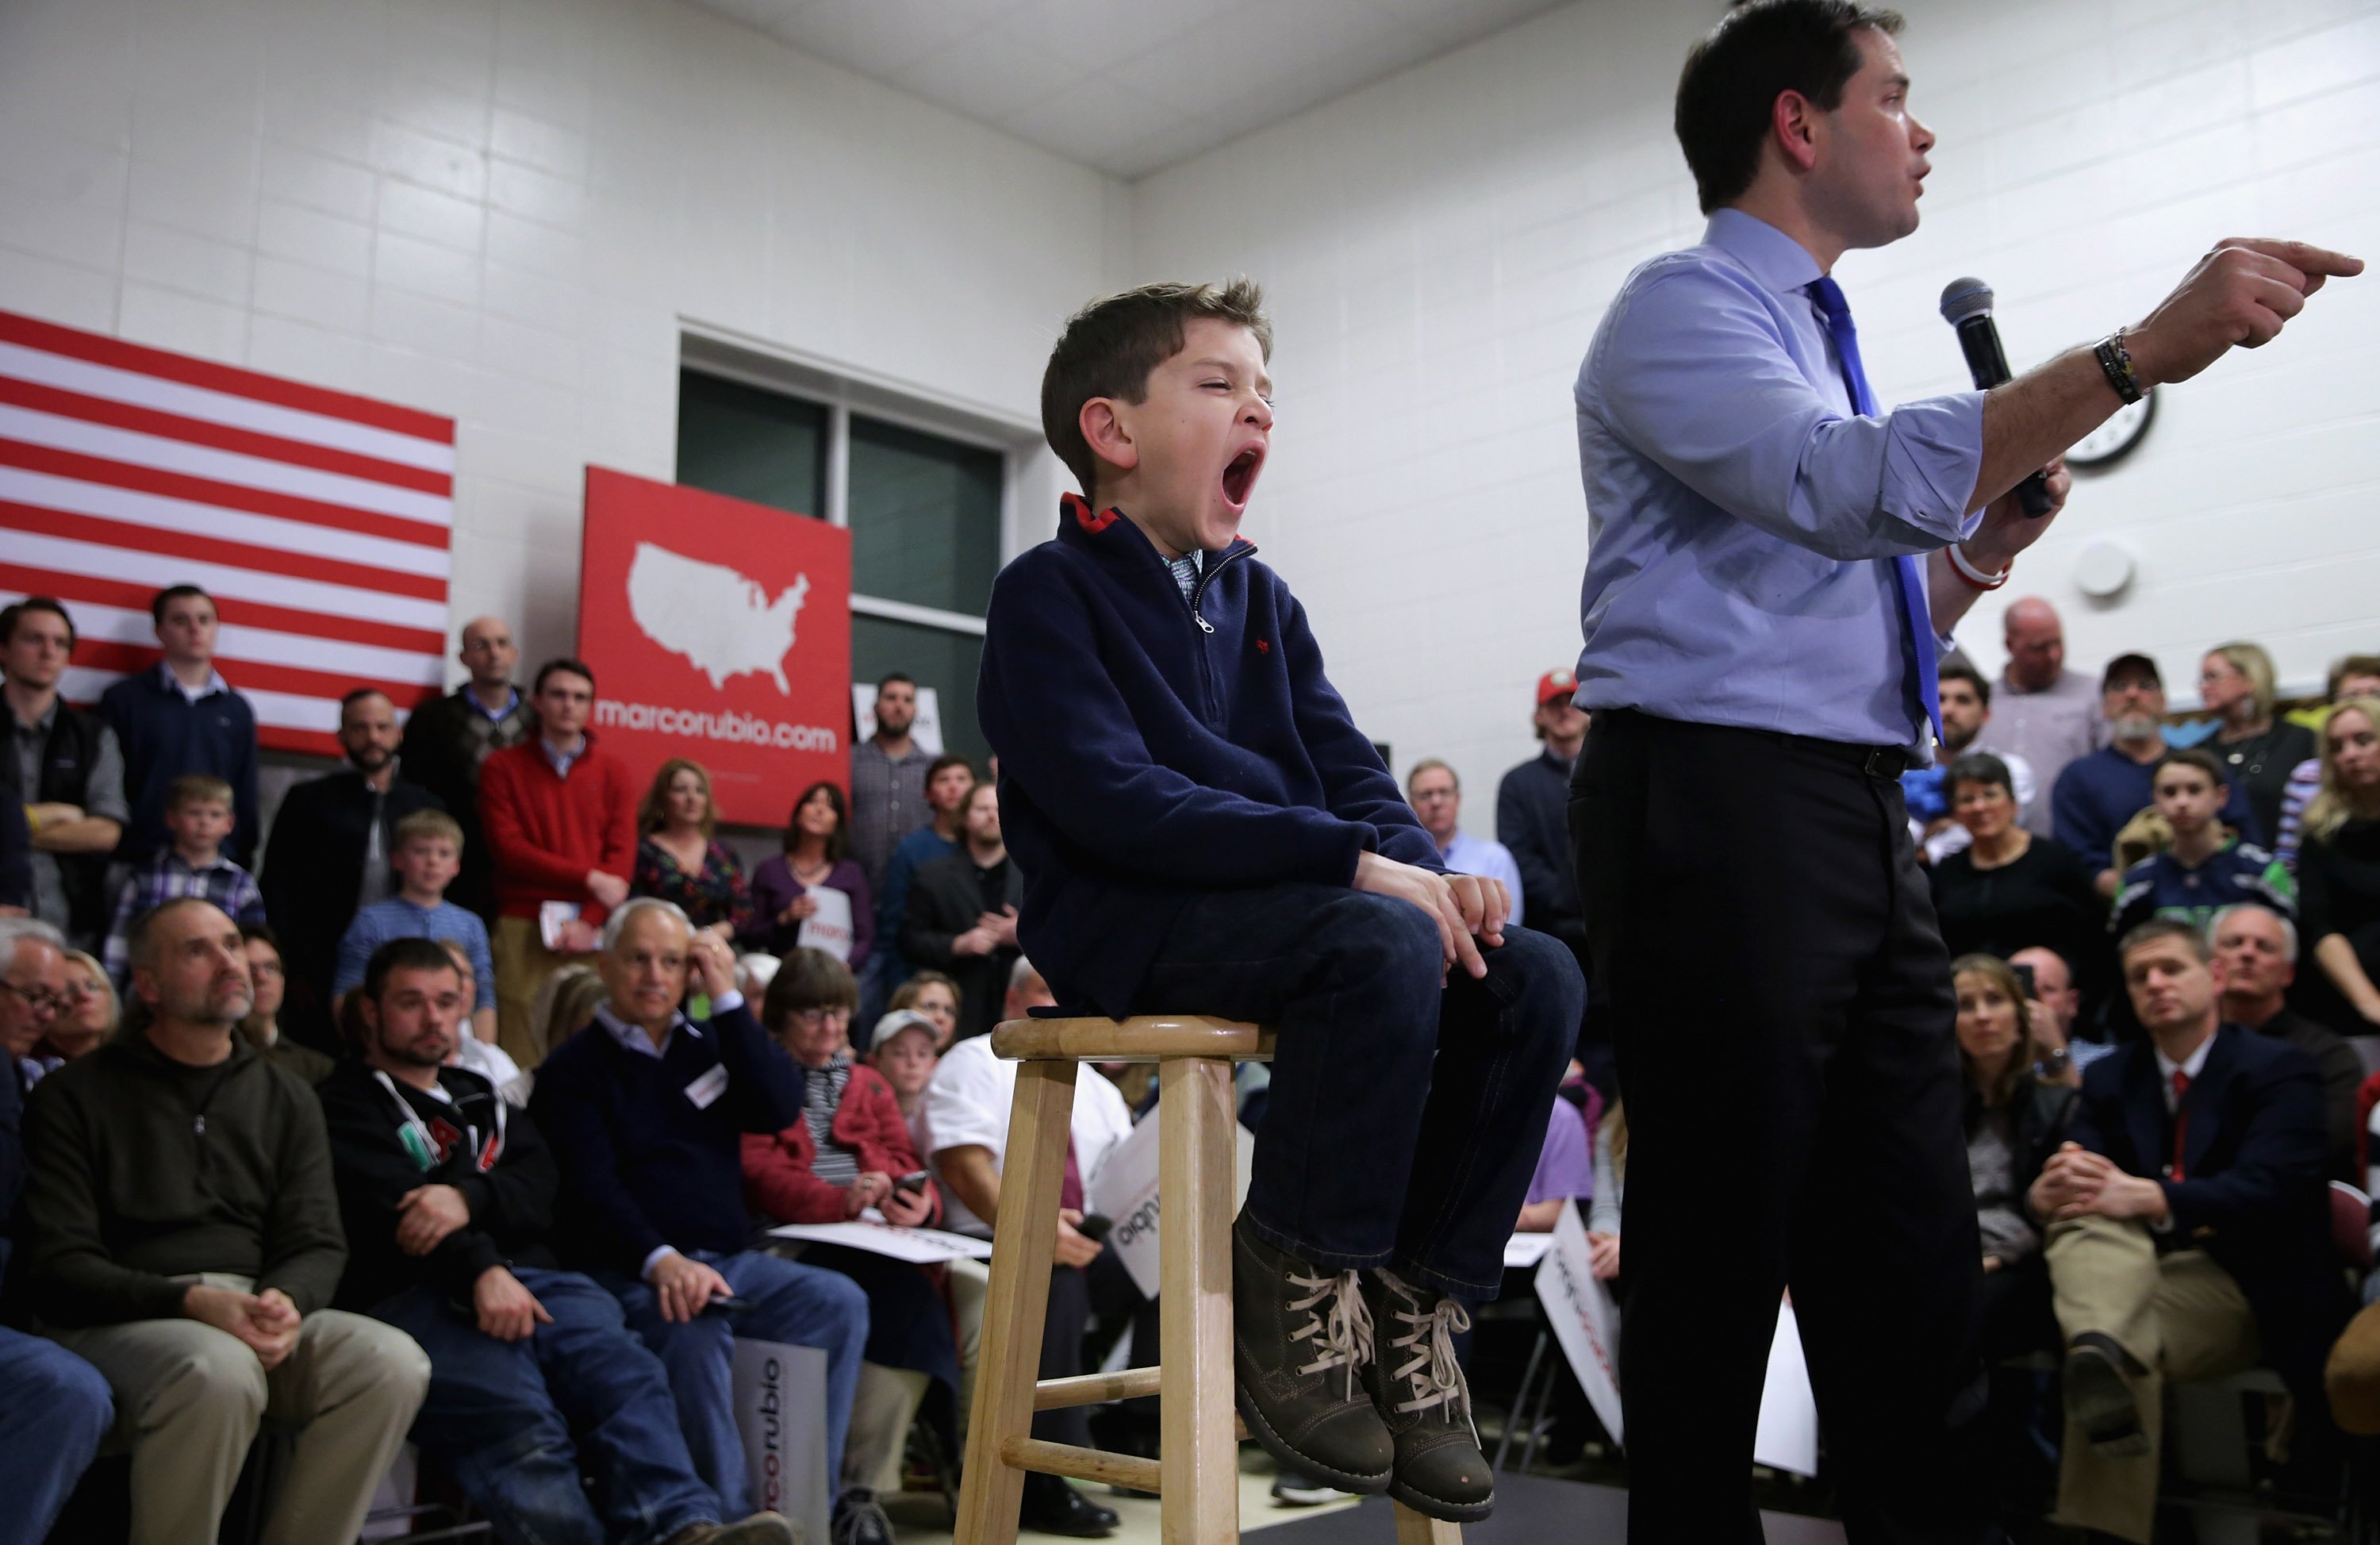 Dominick Rubio, 7, joins his father Republican presidential candidate Sen. Marco Rubio (R-FL) on stage during a campaign town hall event at Mary A. Fisk Elementary School Cafeteria Feb. 4, 2016 in Salem, N.H.